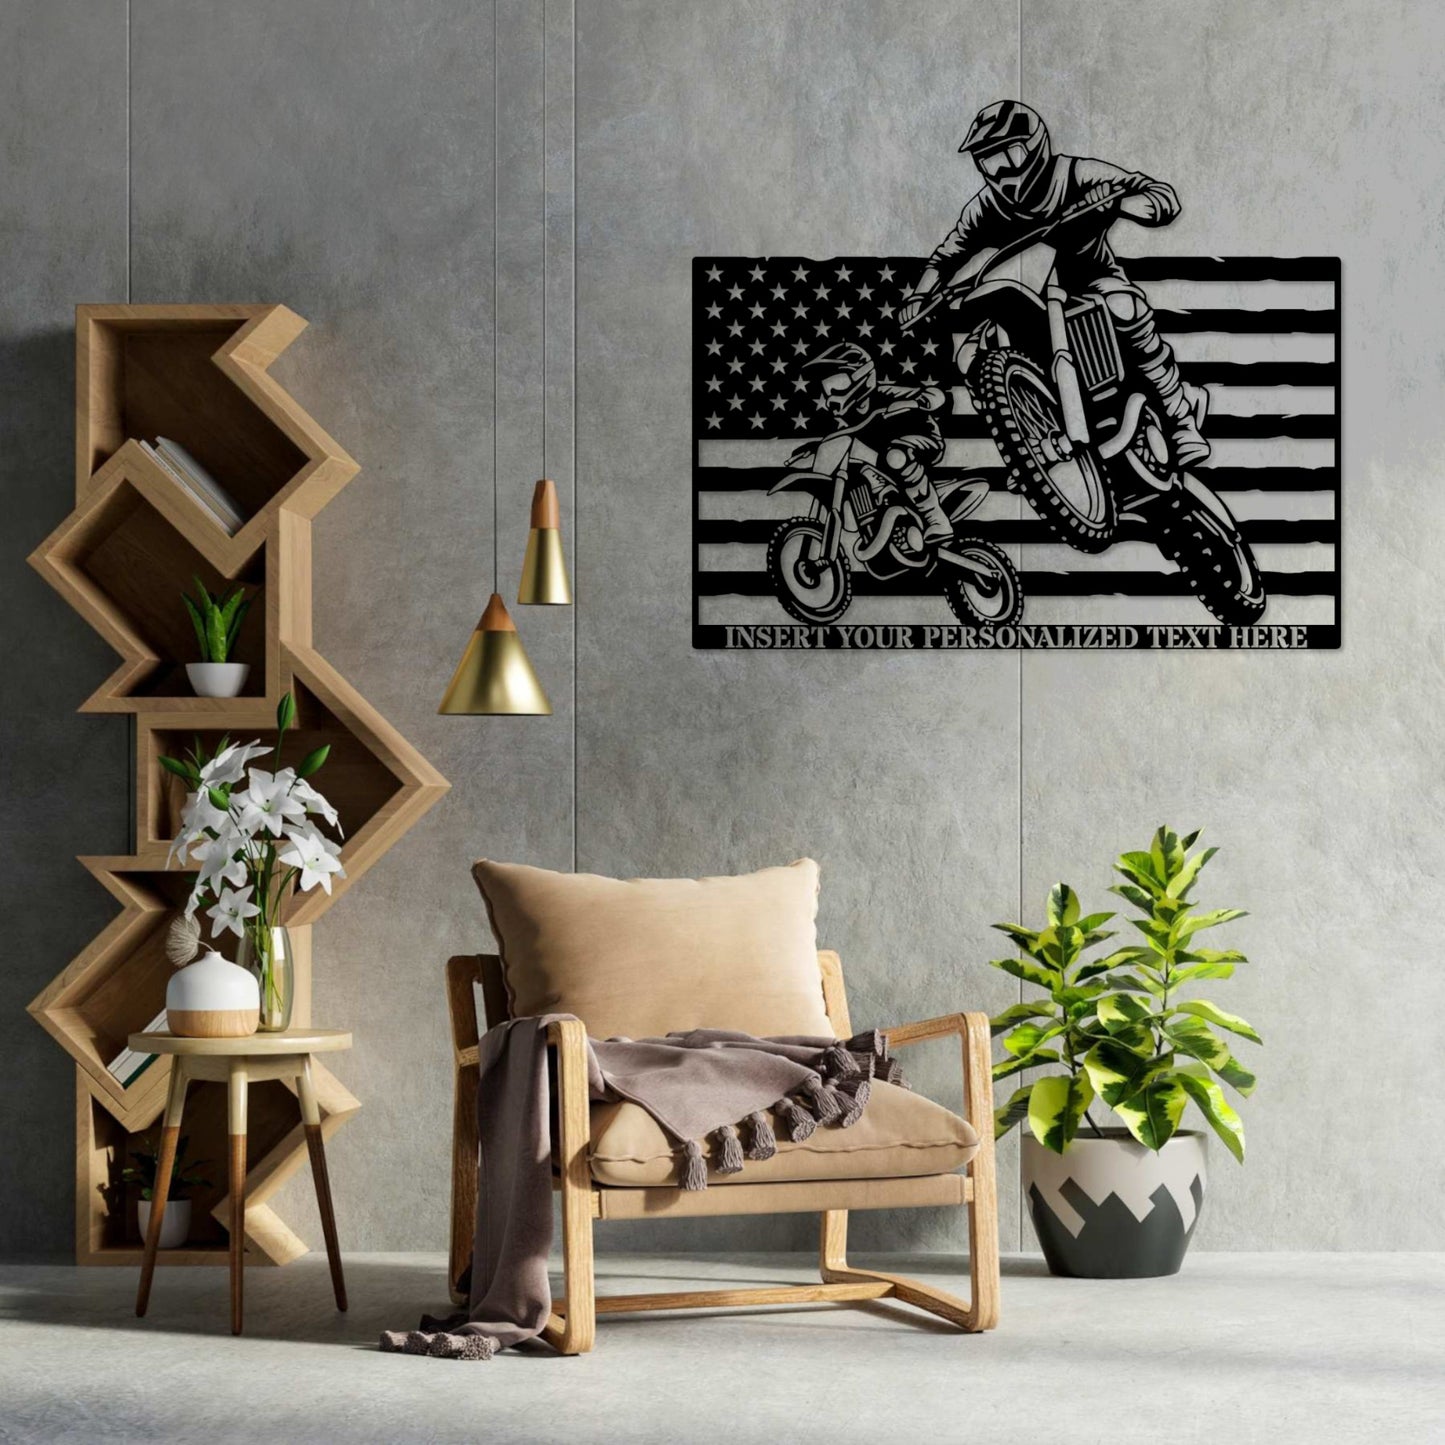 Personalized Dad And Son Dirtbike Name Metal Sign. Custom Patriotic Motocross US Flag Wall Decor Gift. Father's Day Gift. Biker Monogram Art